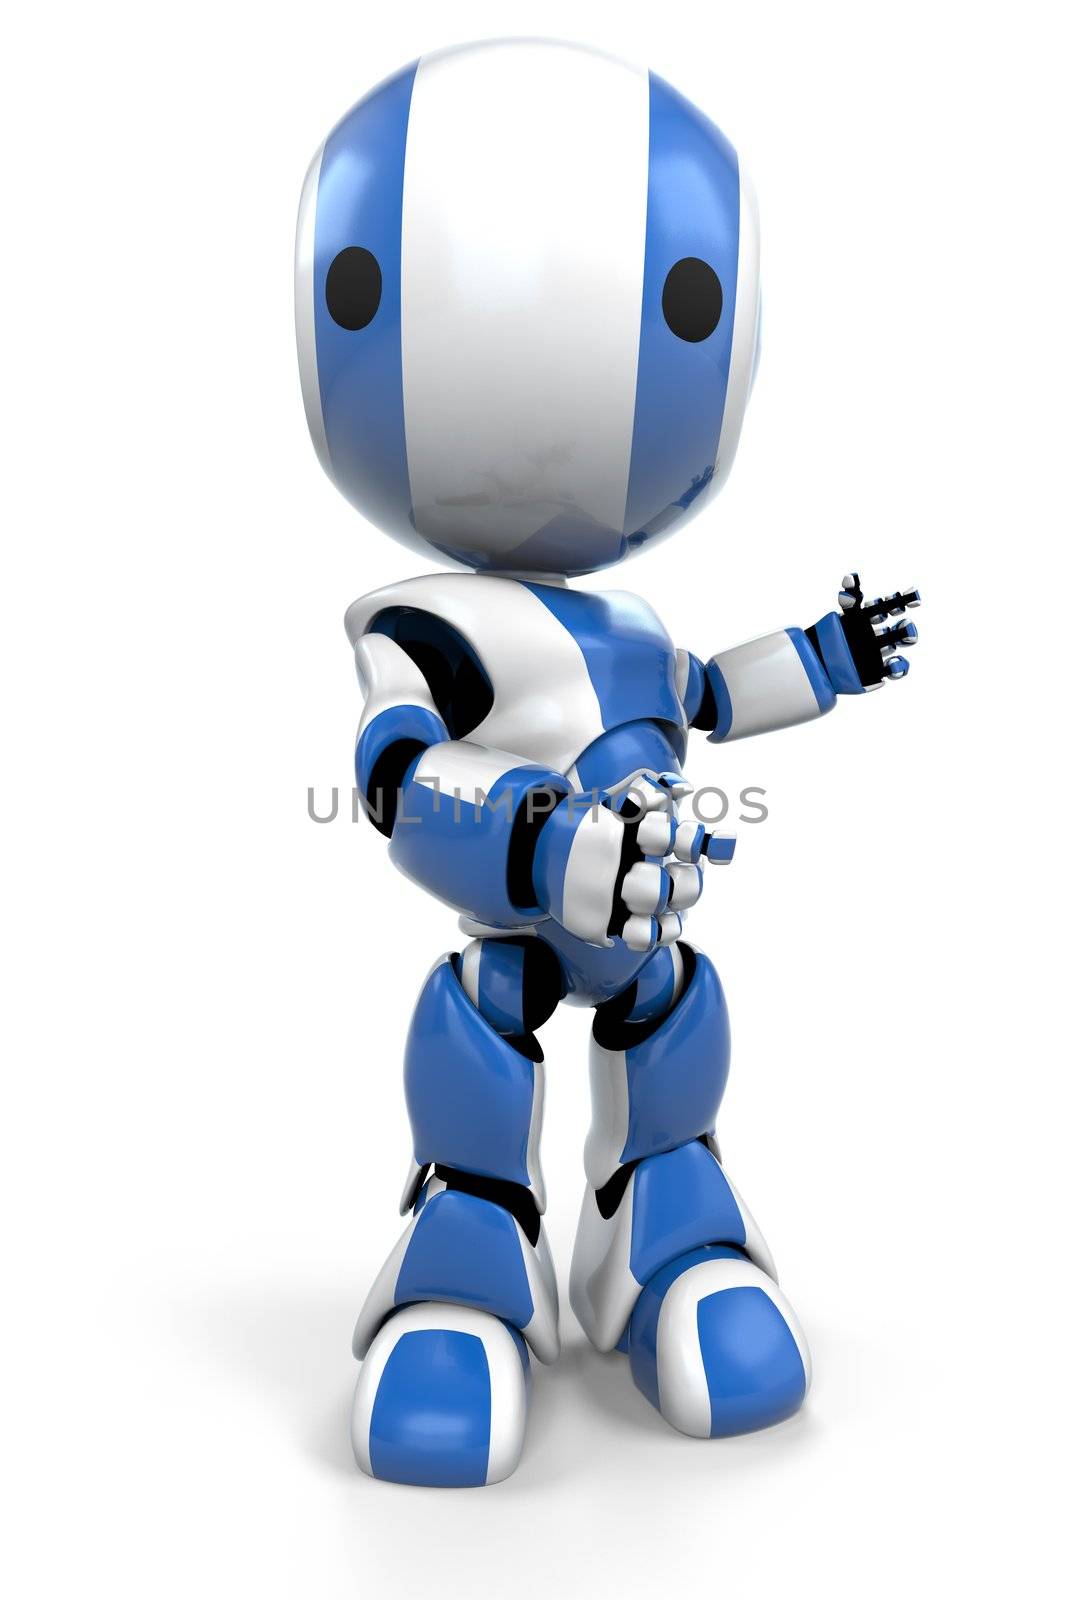 A blue robot making a gesture to the right as he speaks to or looks at his audience. 